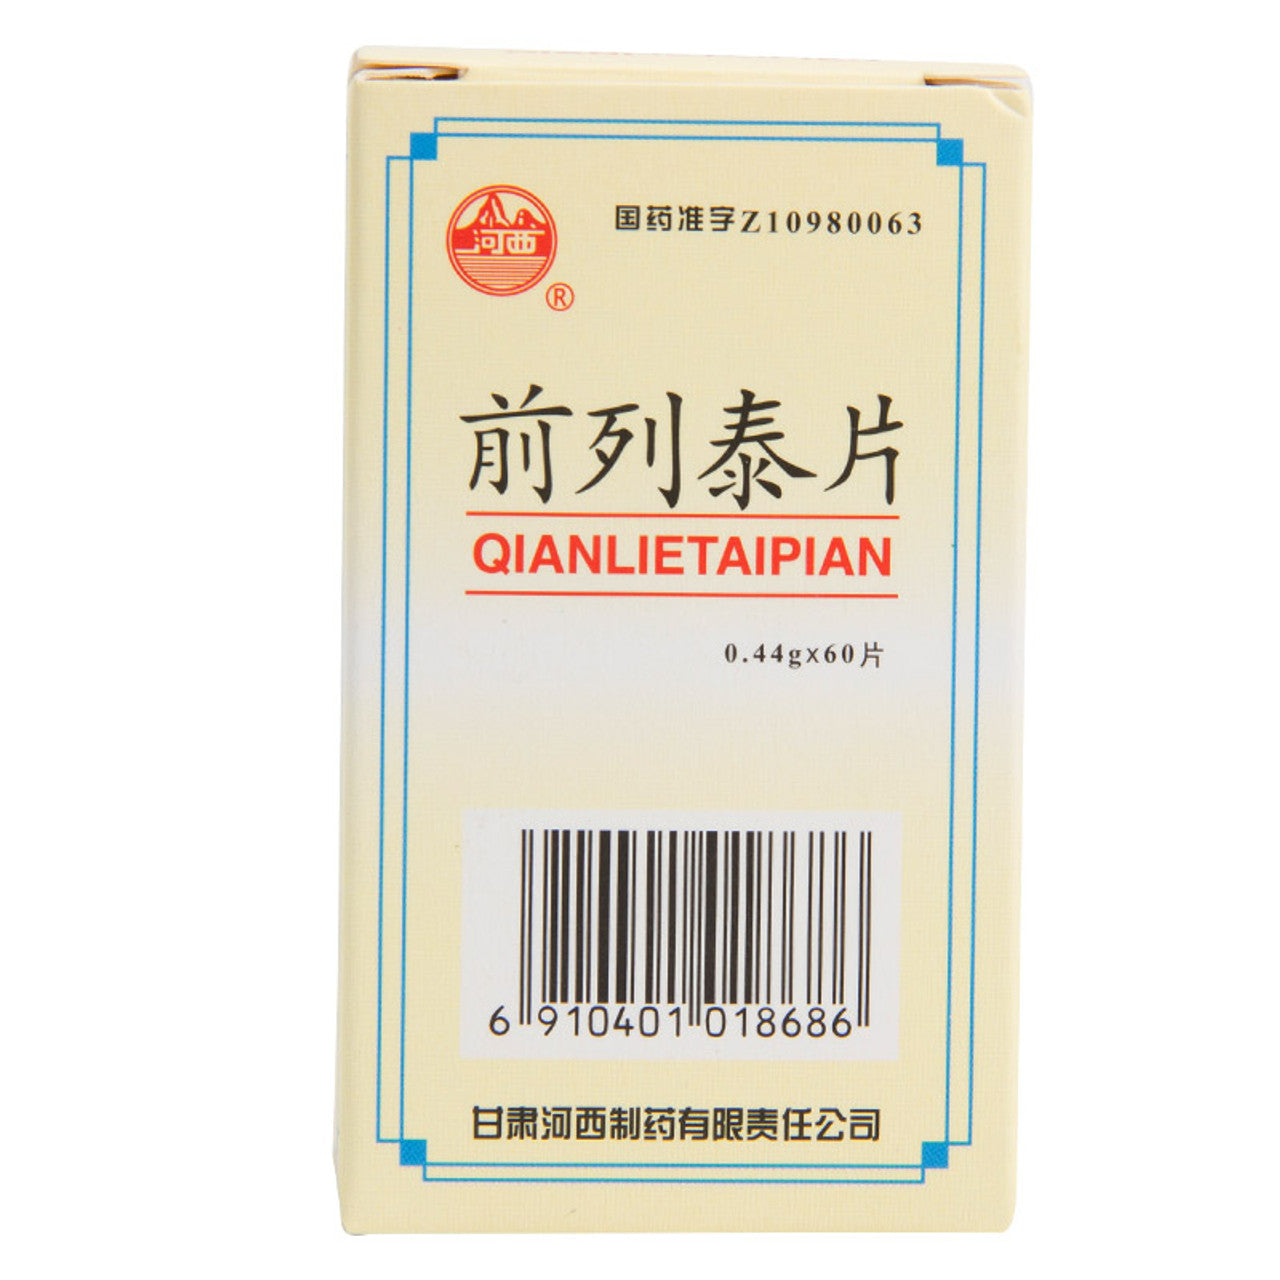 (0.44g*60 Tablets*5 boxes/lots). QIANLIETAIPIAN or Qianlietai Pian or Qianlietai Tablets For Prostatitis.